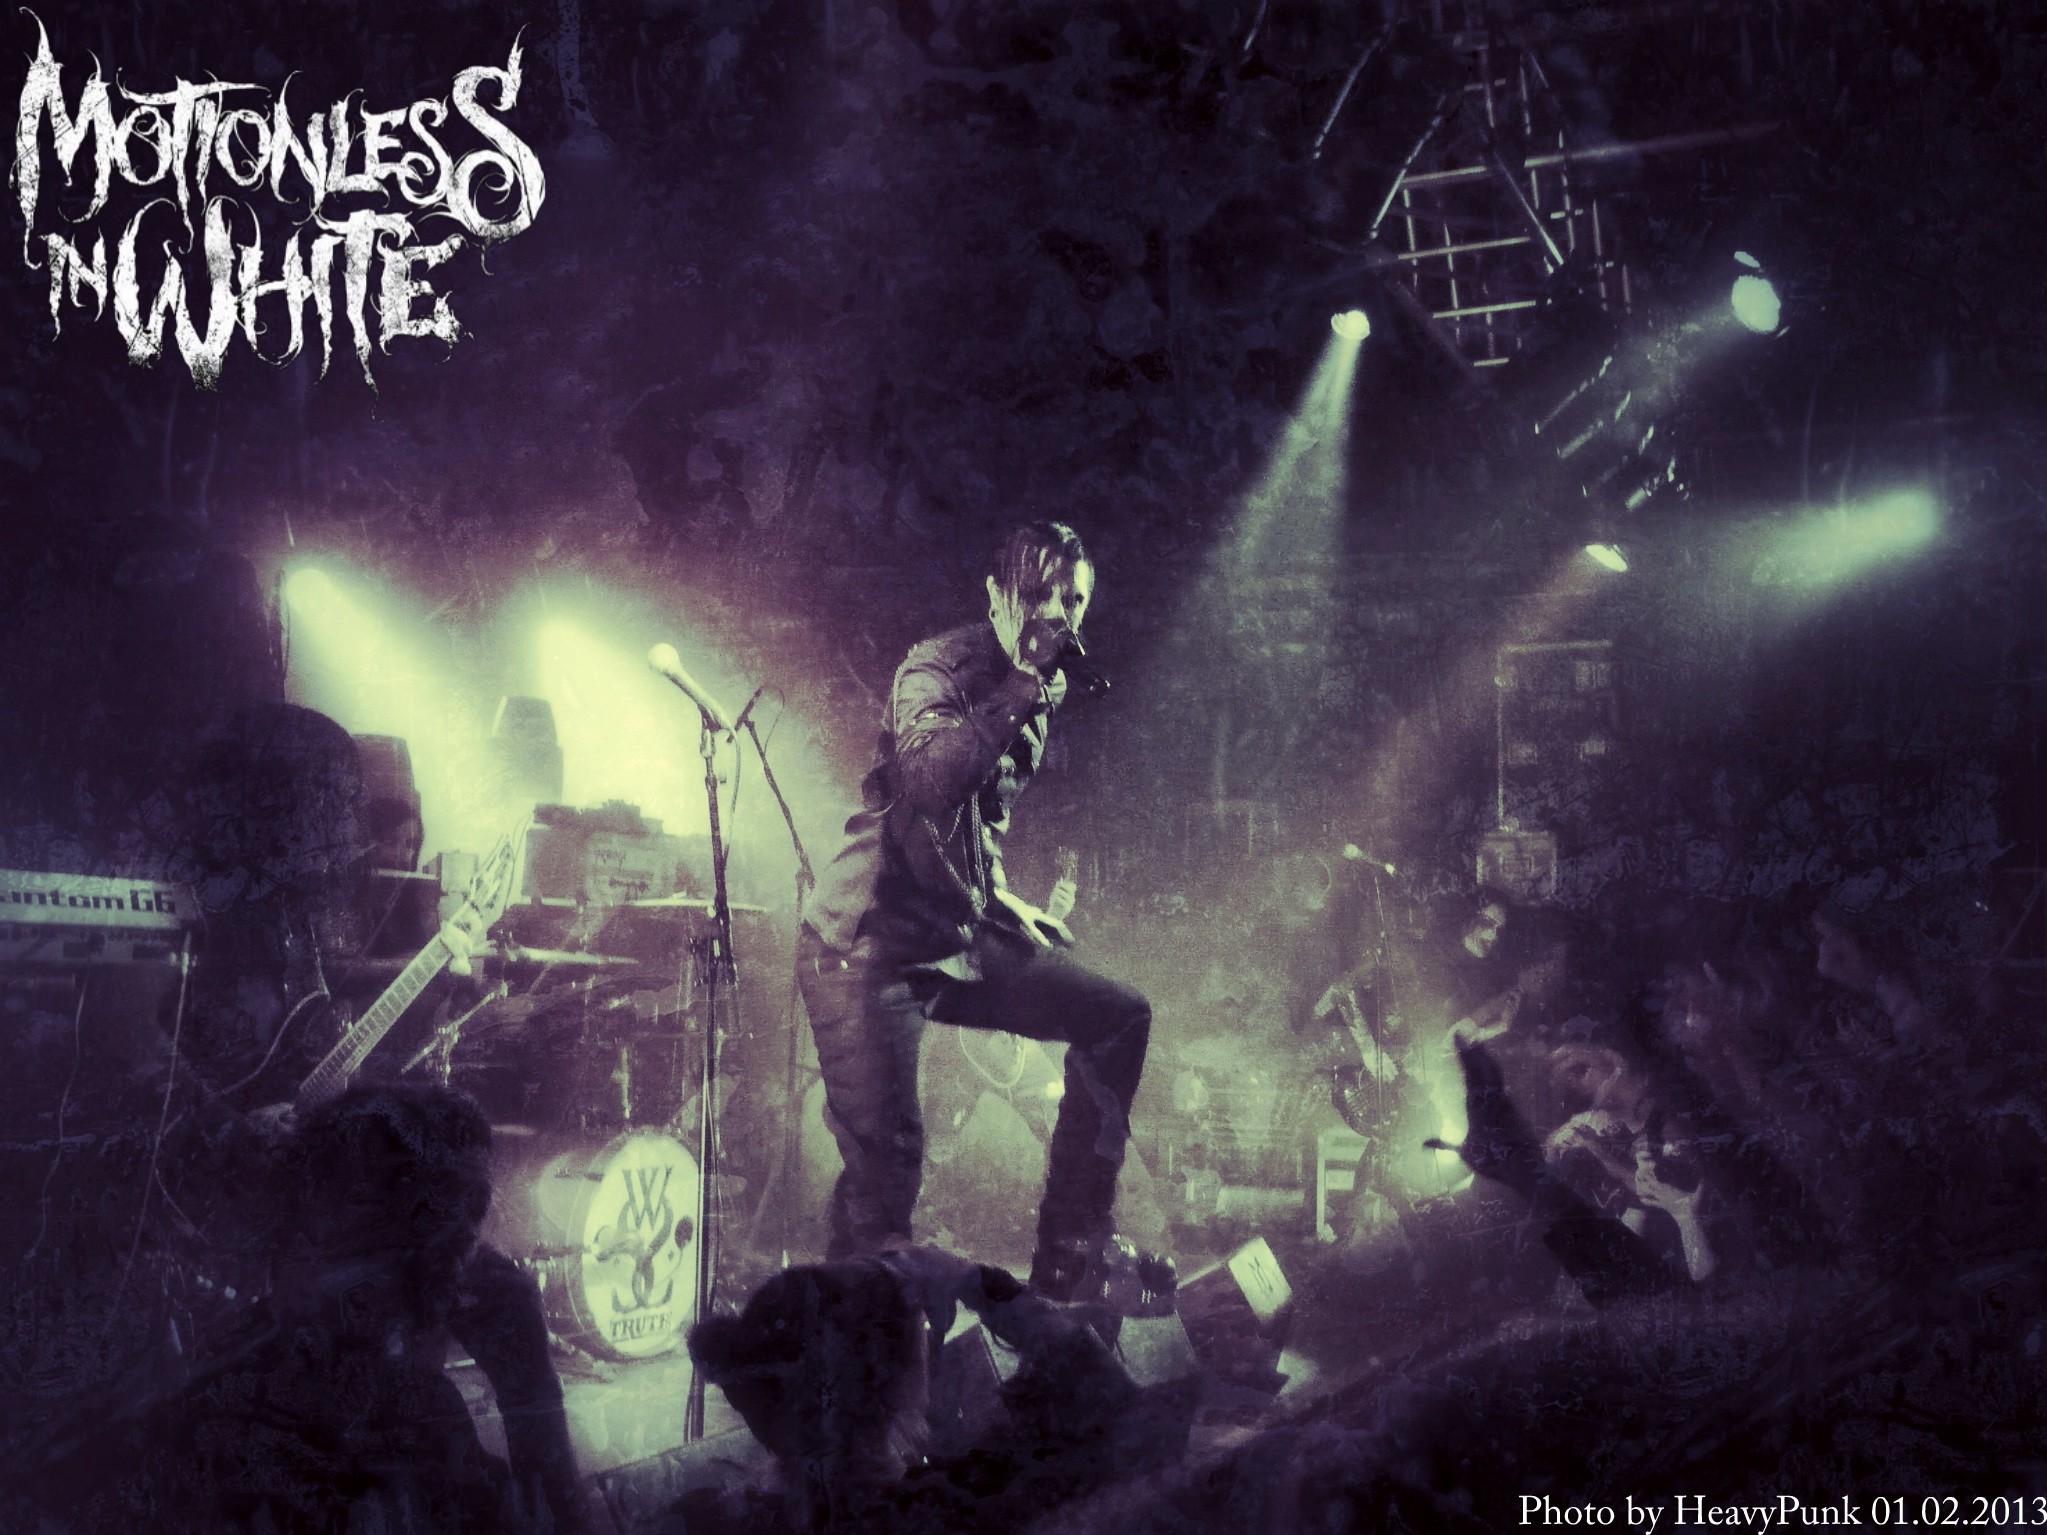 2047x1535 Motionless in White [live in concert] by MaxiMotionless on DeviantArt